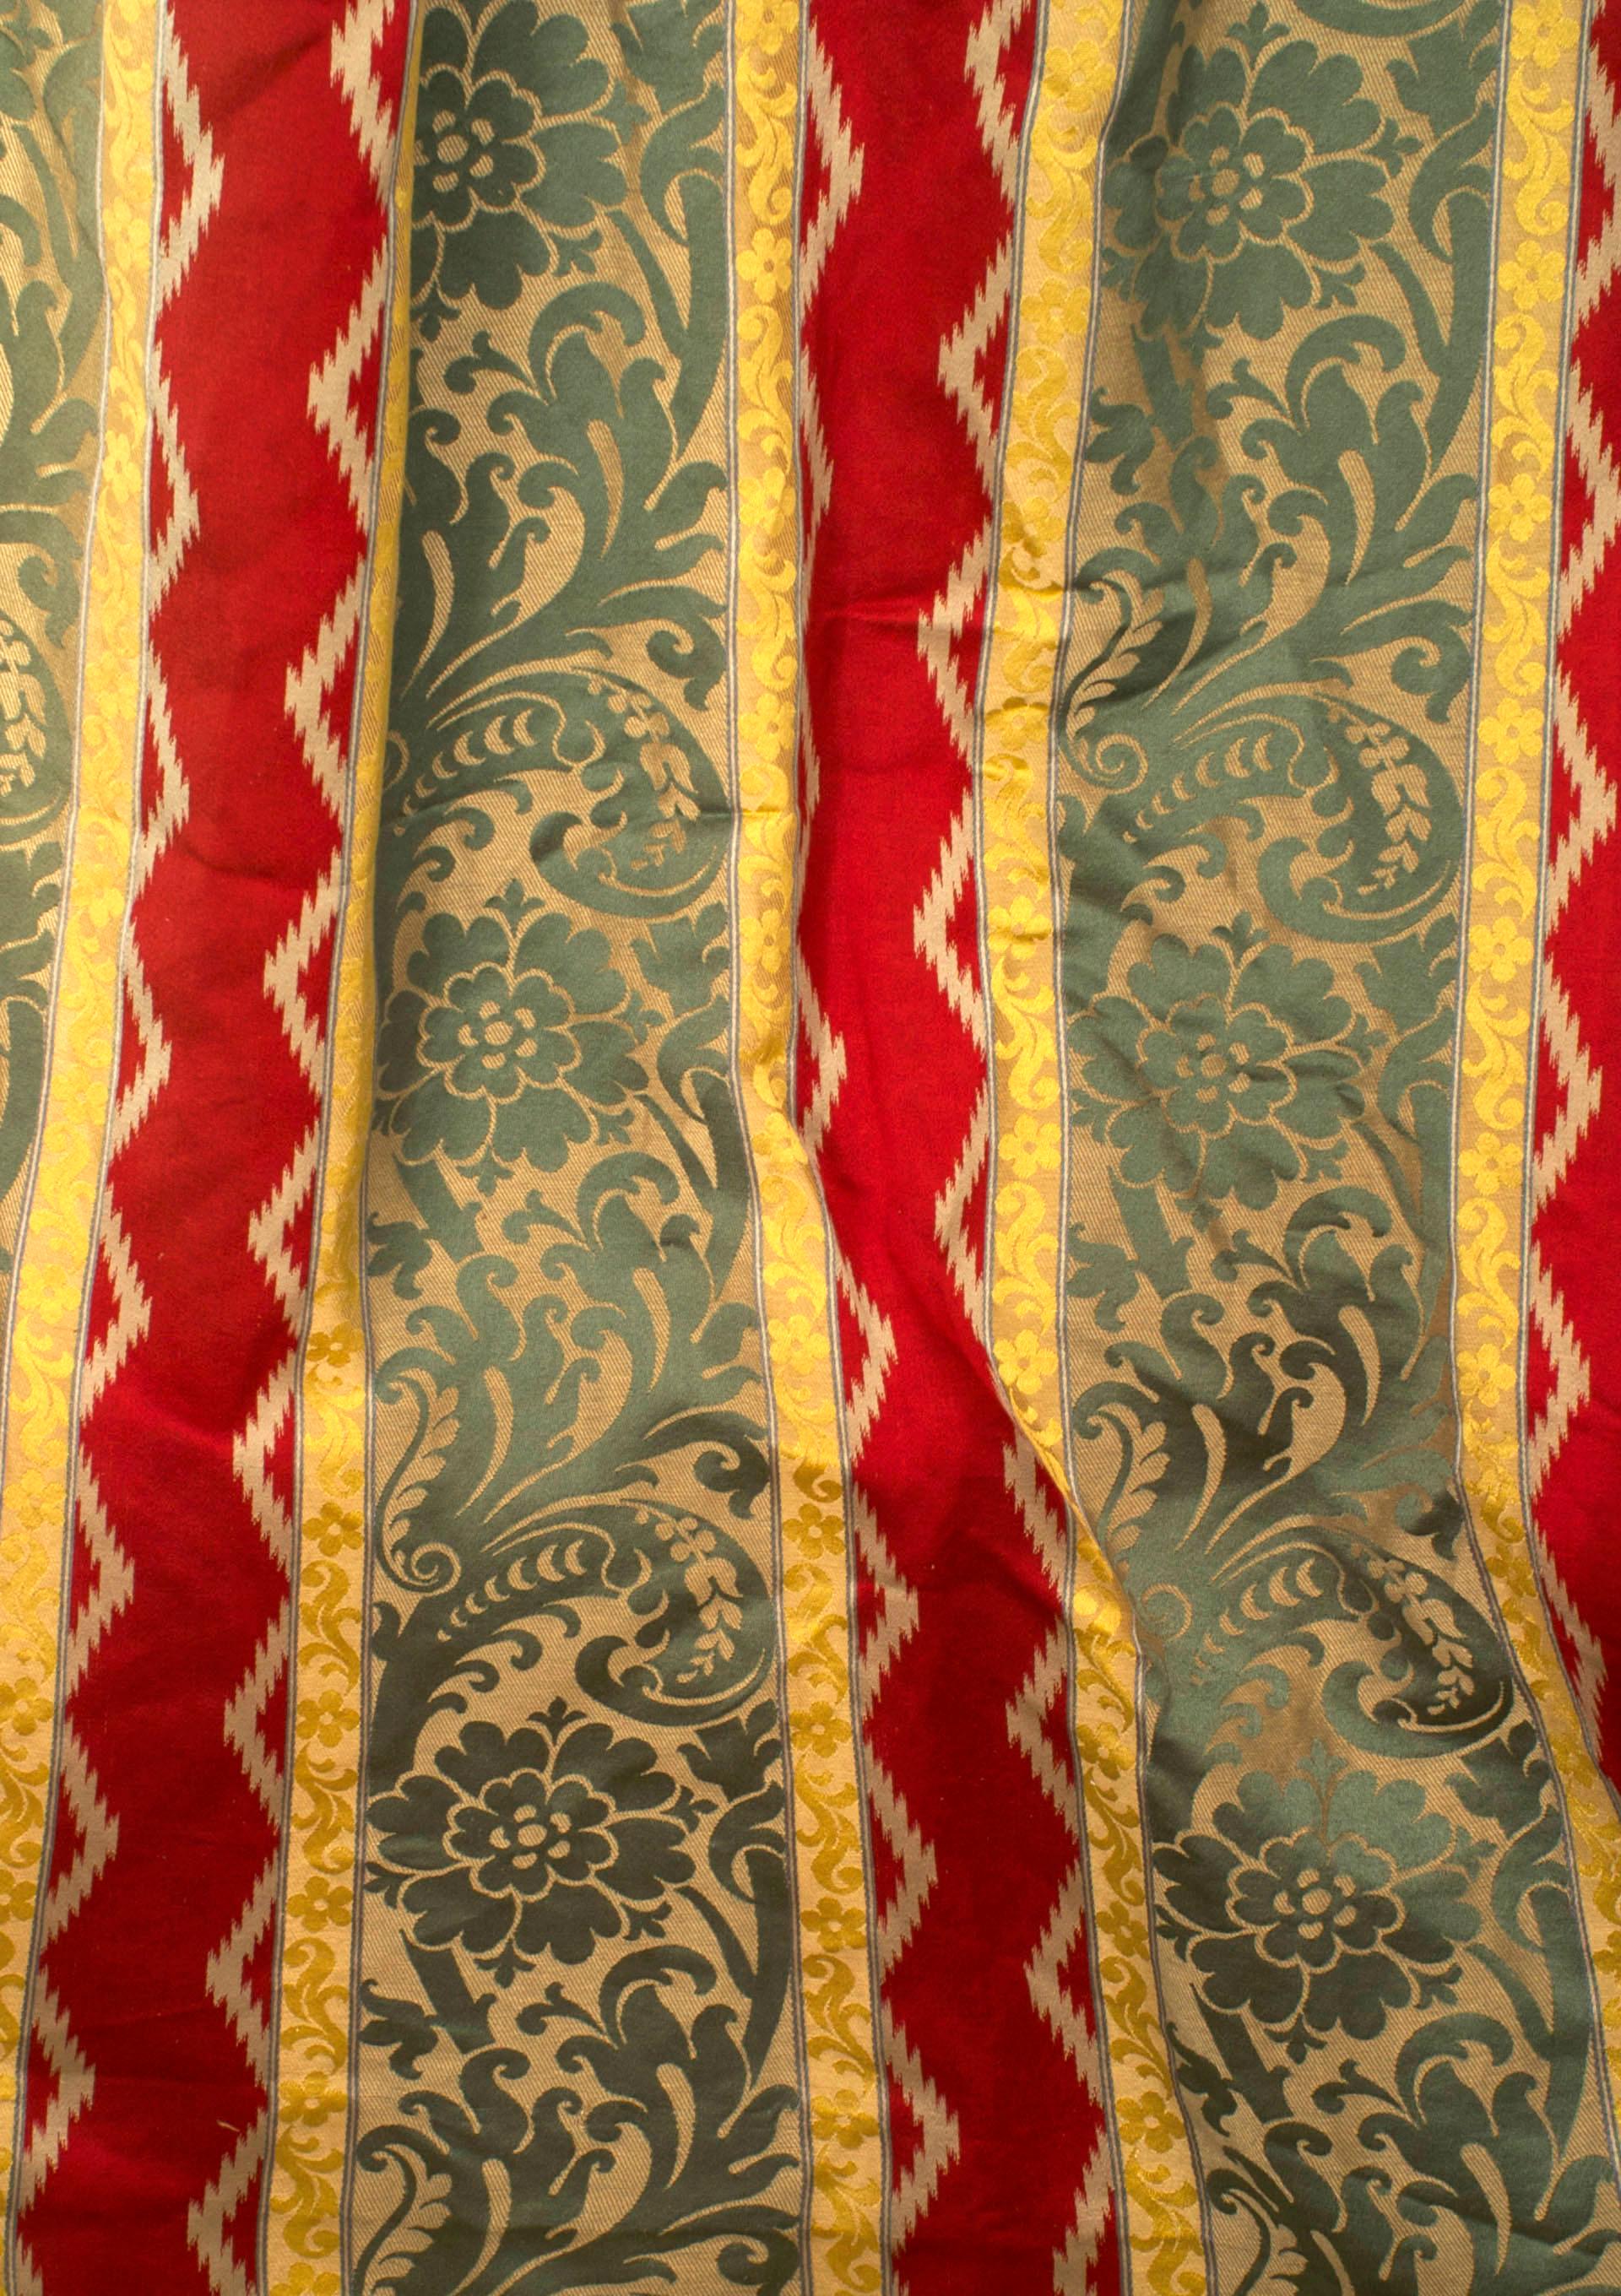 3 Pairs of French Victorian style damask drapes with green, red and gold striped floral and scroll design panels with brass gold ring for hanging (priced per pair).
 